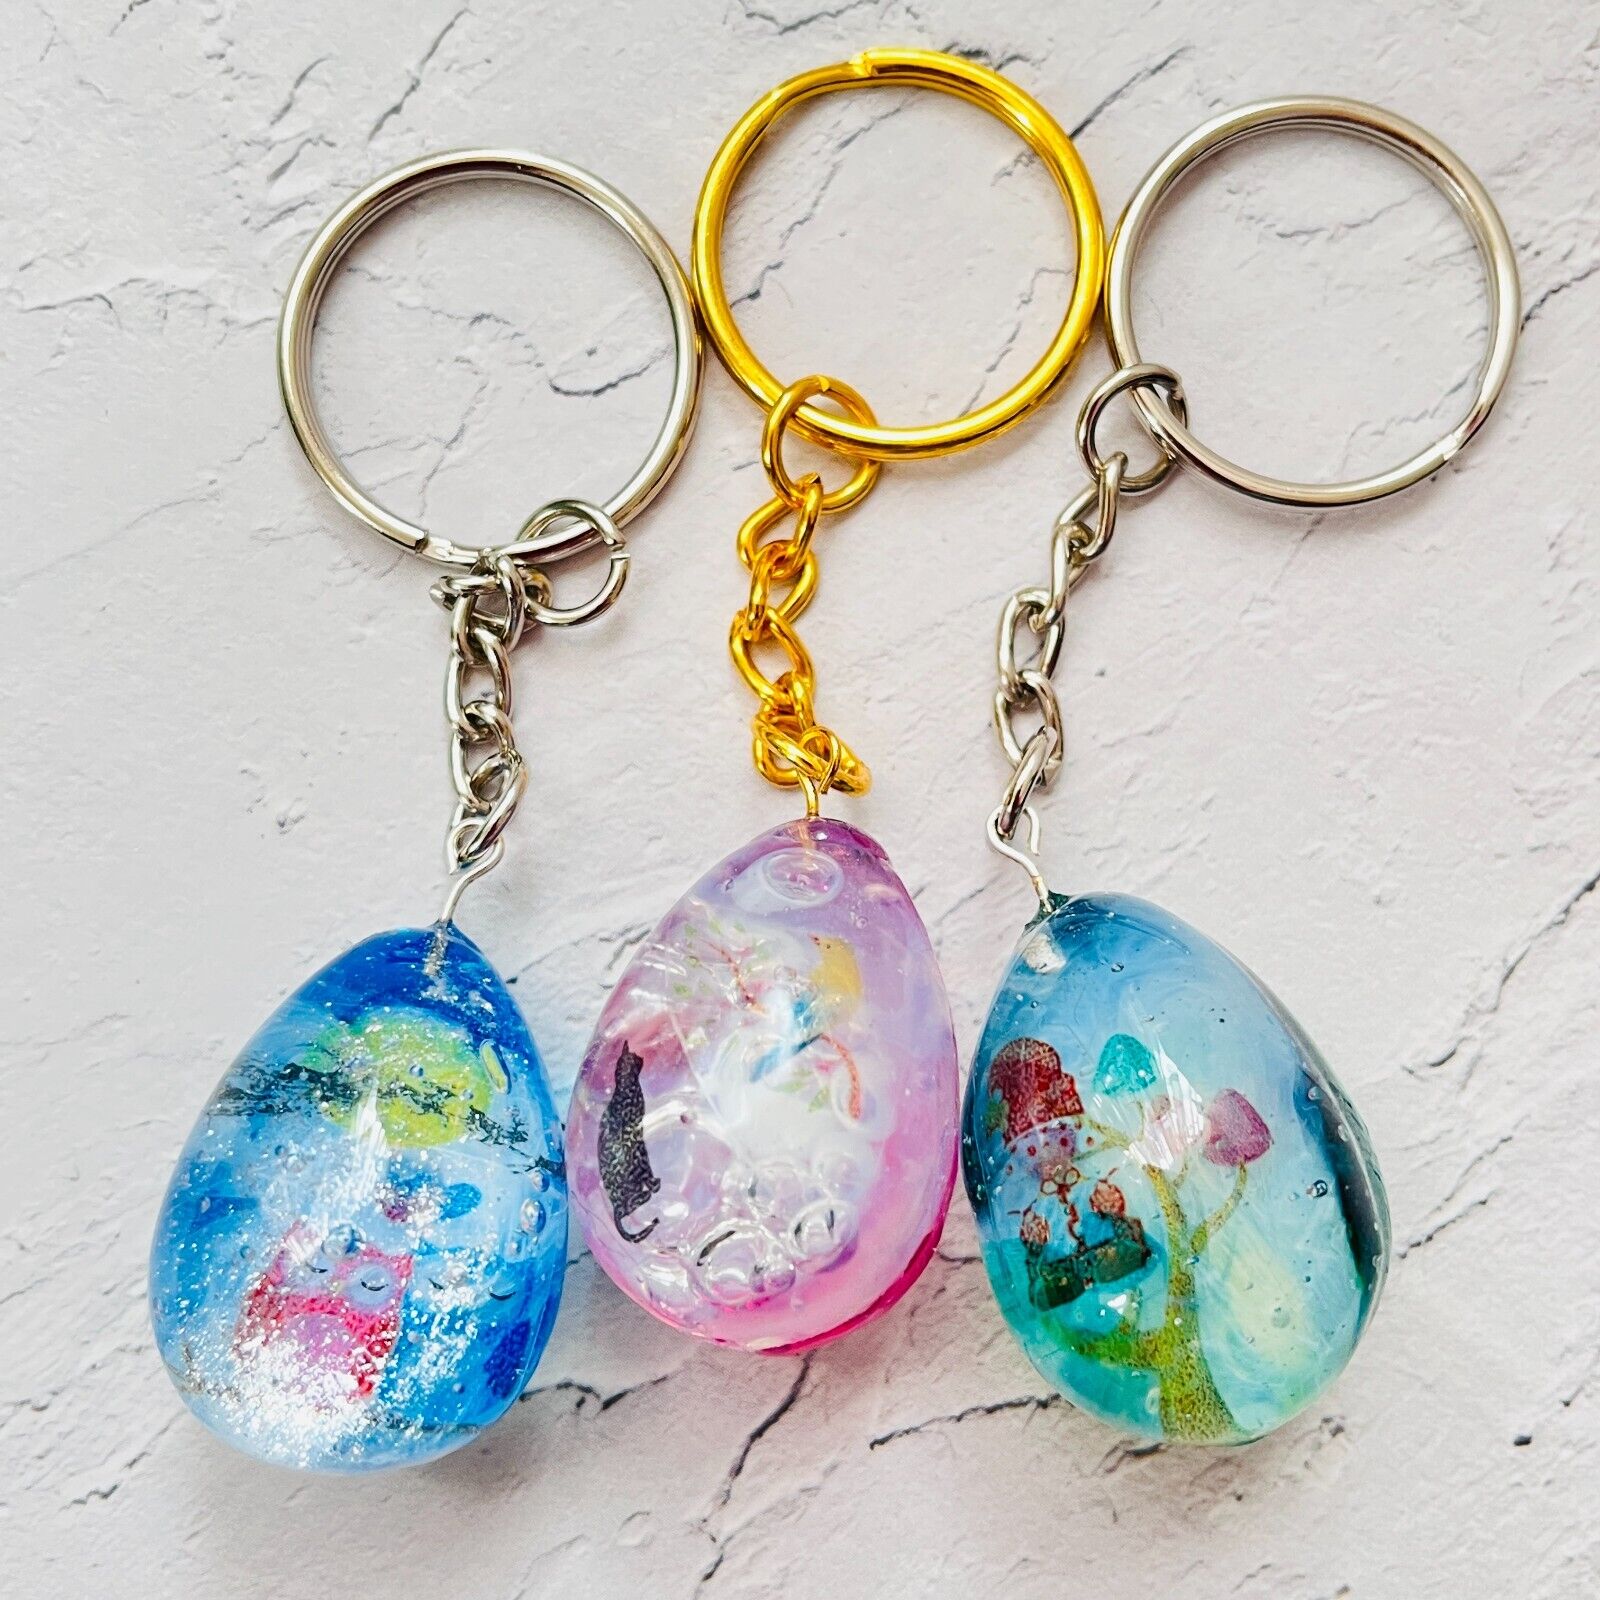 Colorful Resin Keychain Set - Encapsulated Glitter & Charms, Unique Gift